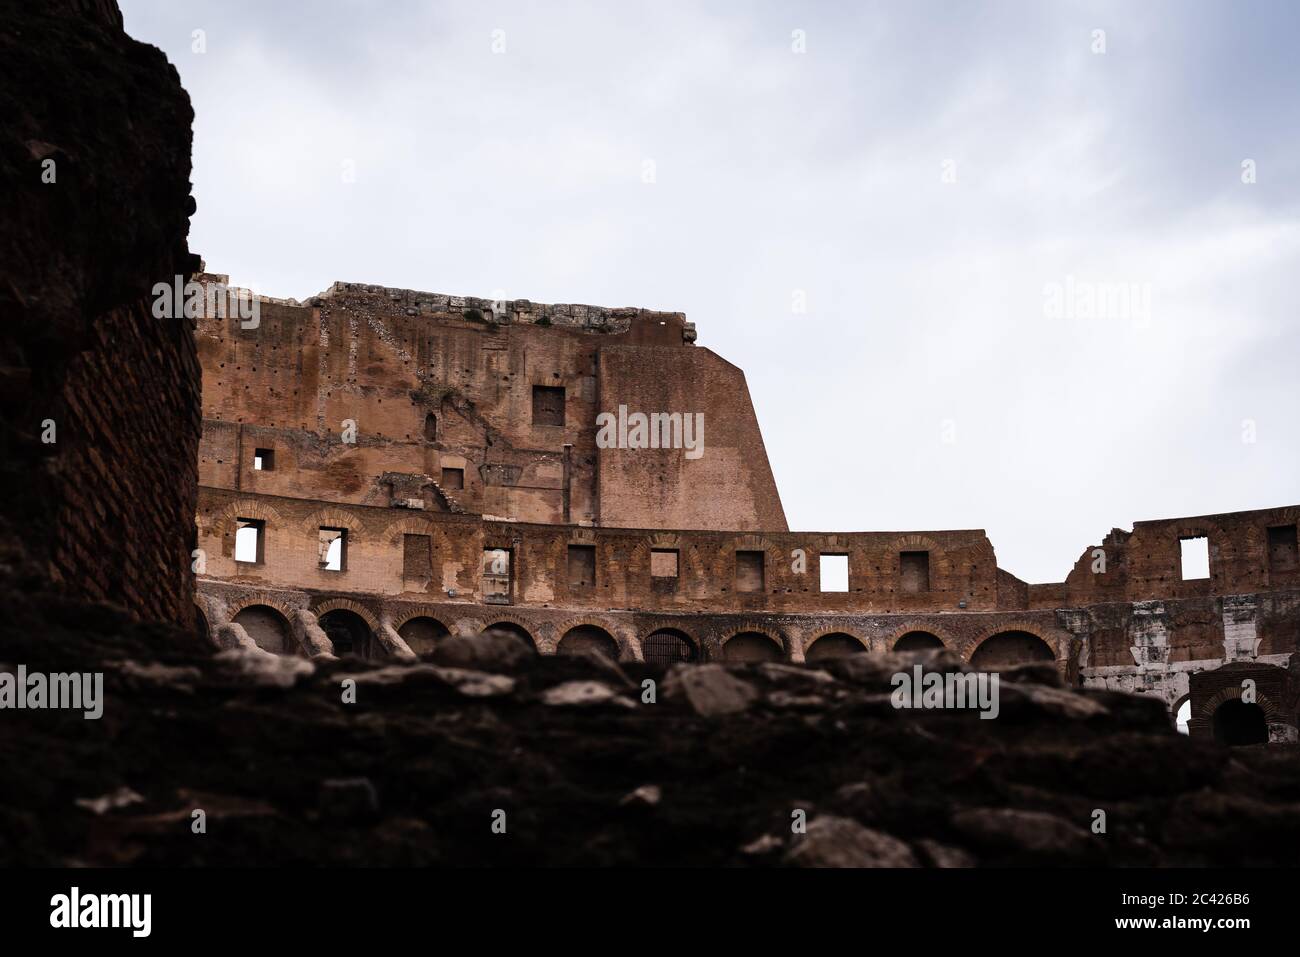 Interior ruins of the sumptuous Colosseum in Rome, Italy Stock Photo